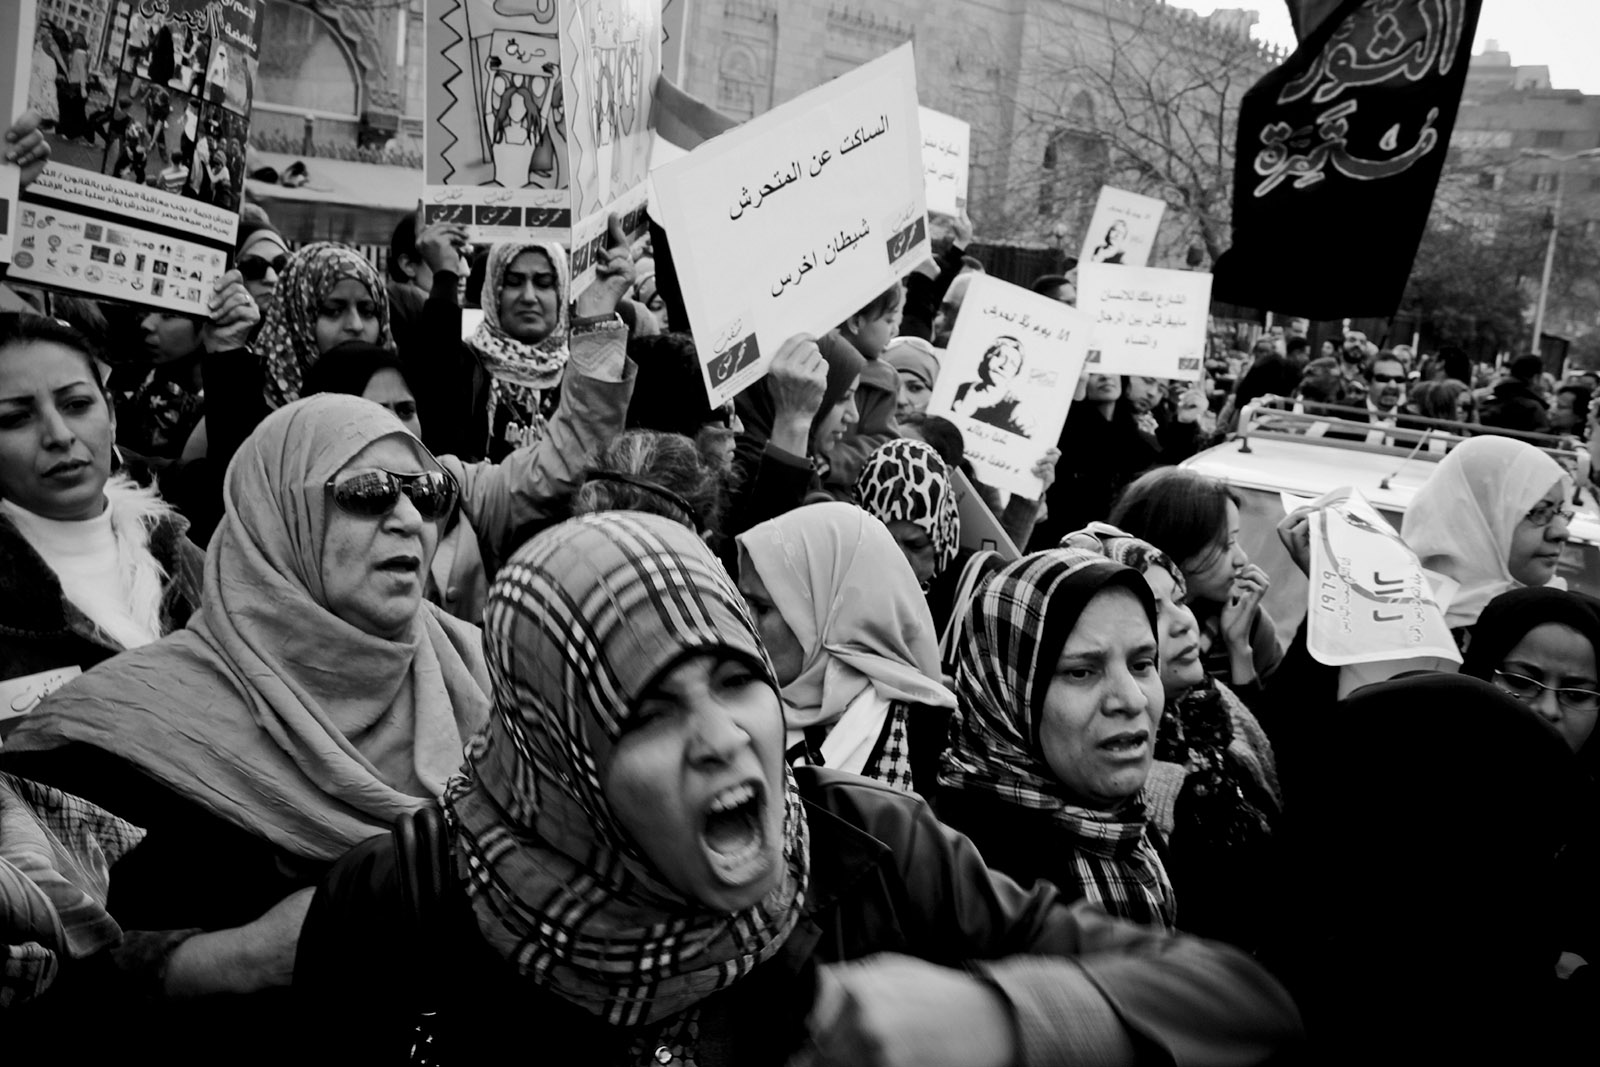 A march organized by Opantish and other feminist and political groups protesting against sexual harassment, Cairo